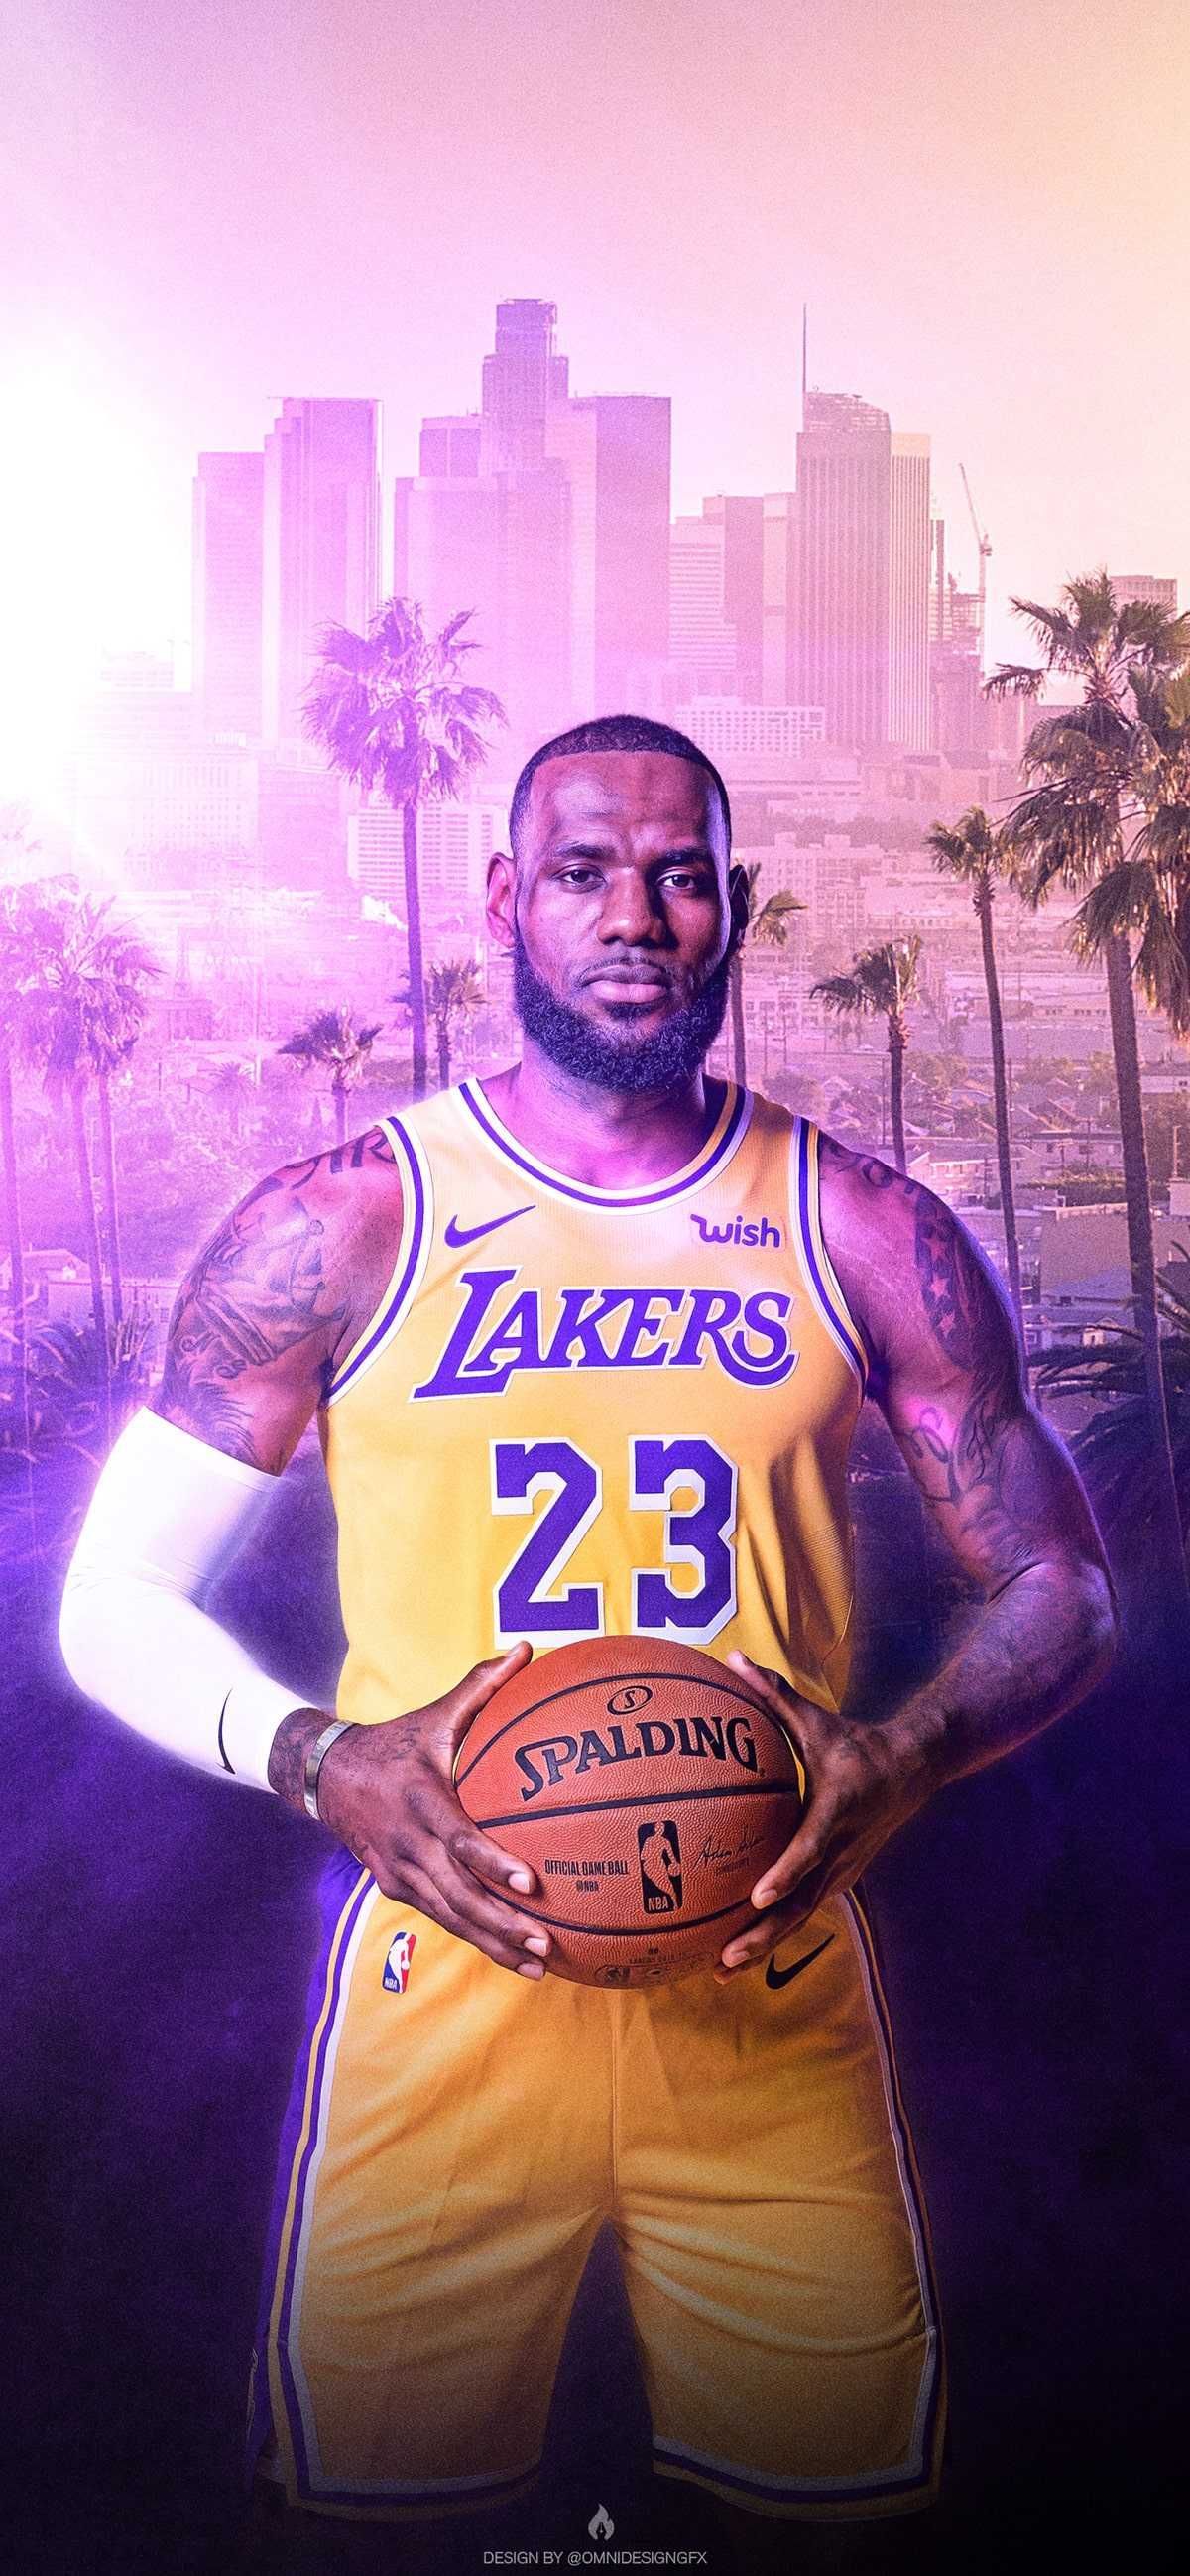 Lebron James Lakers iPhone Wallpaper with high-resolution 1080x1920 pixel. You can use this wallpaper for your iPhone 5, 6, 7, 8, X, XS, XR backgrounds, Mobile Screensaver, or iPad Lock Screen - Lebron James